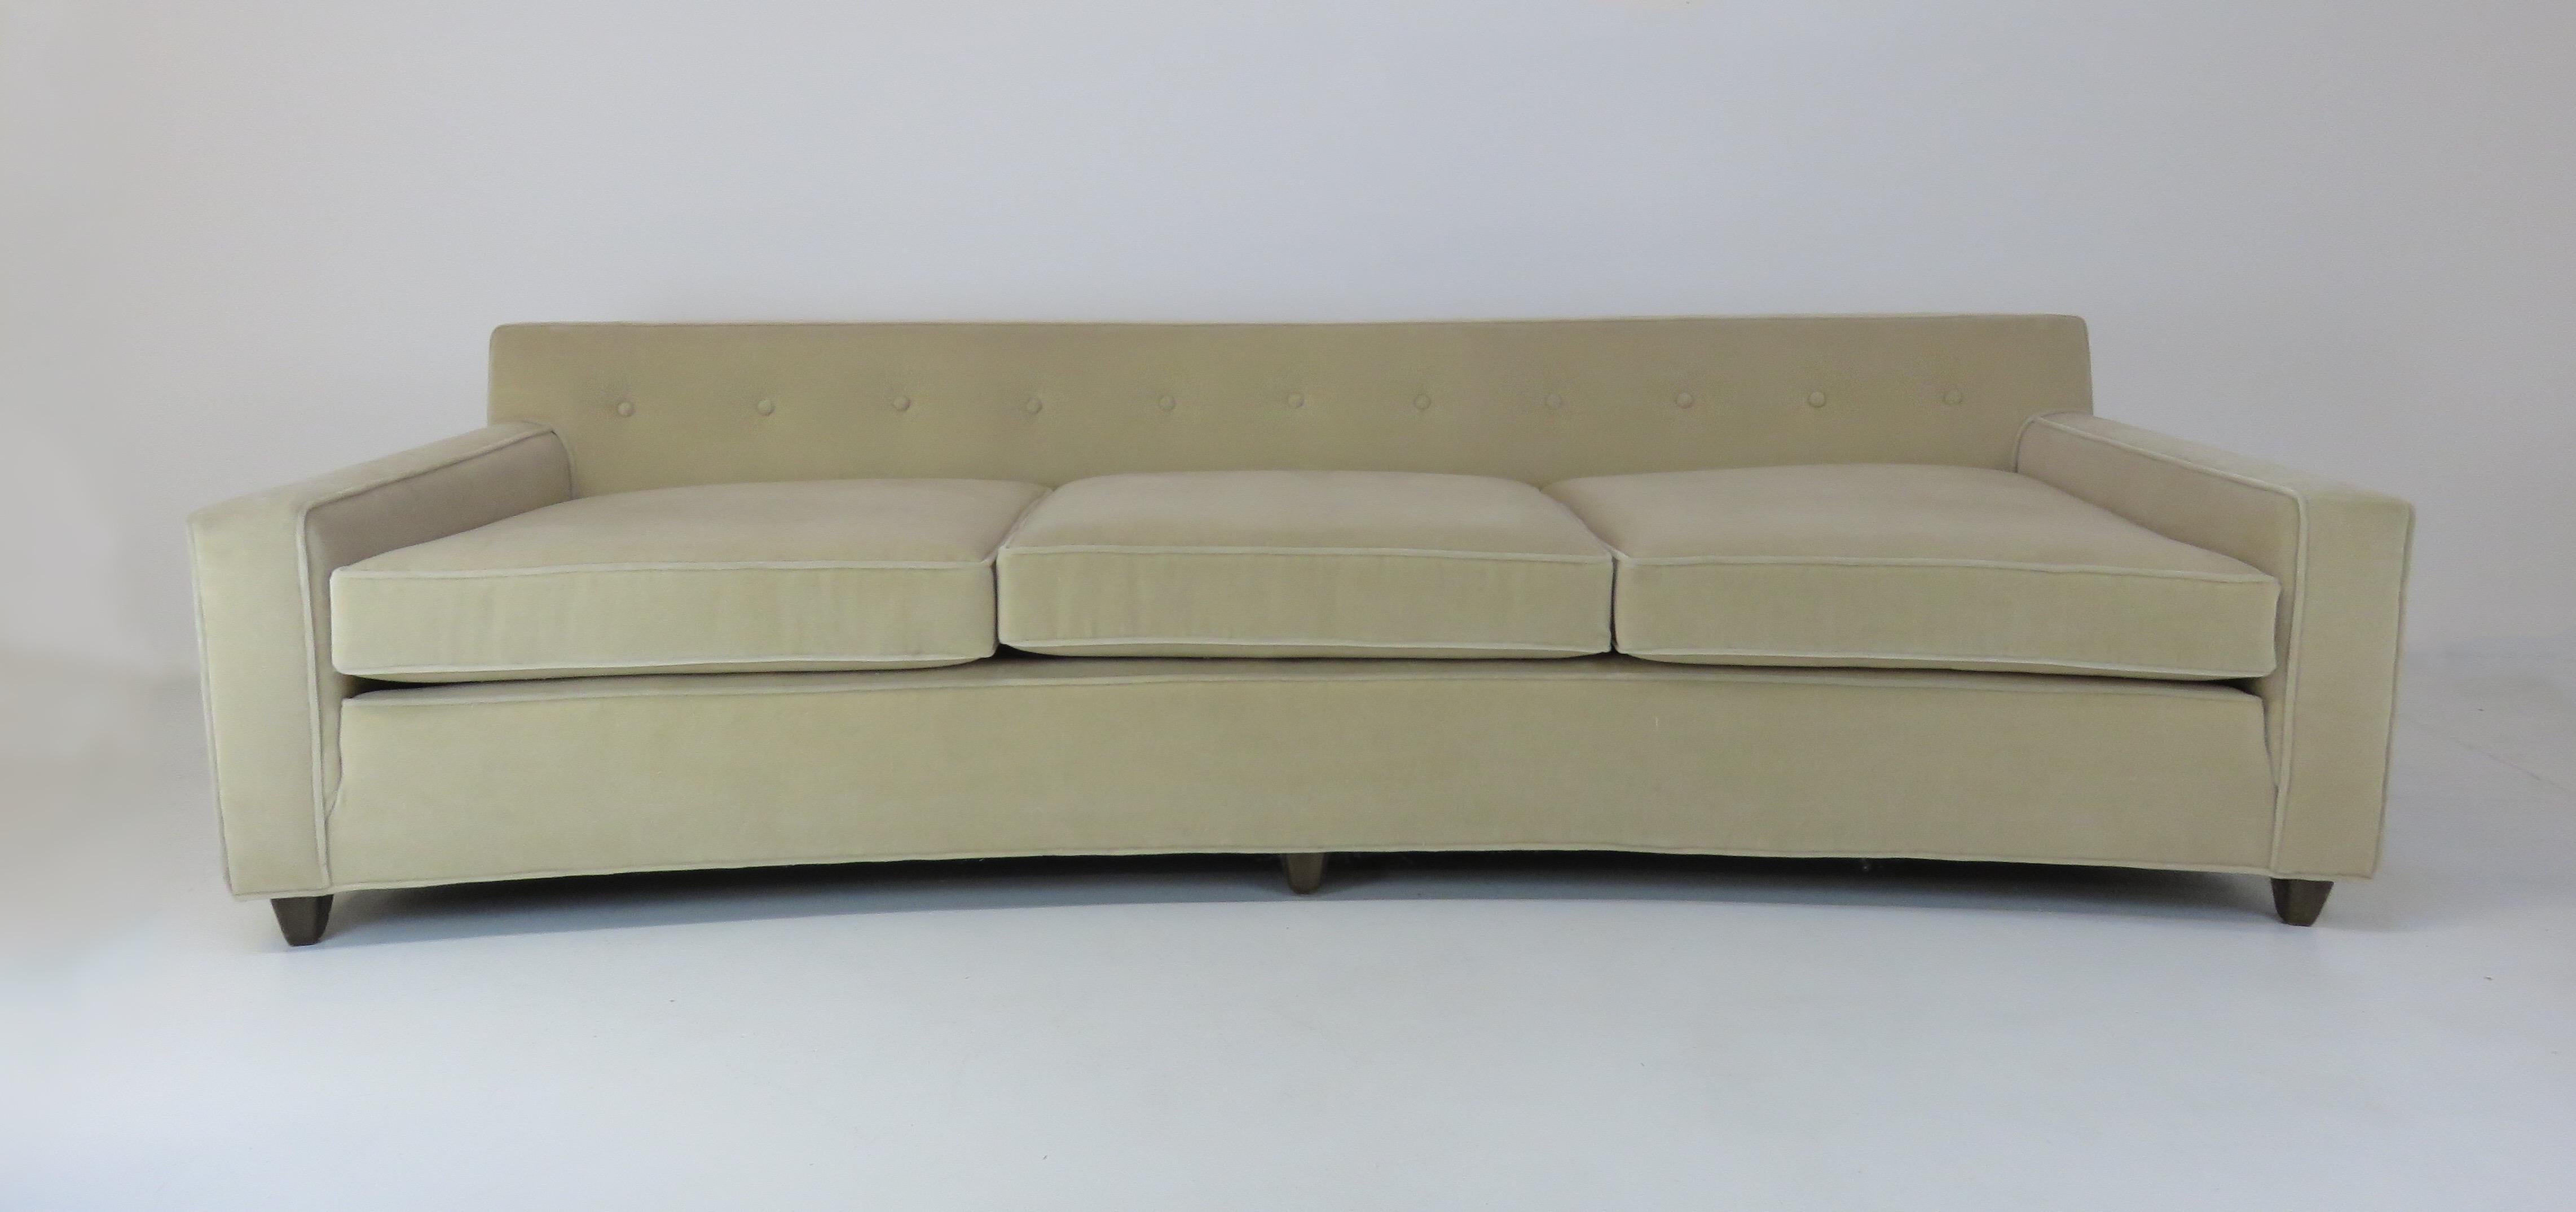 A wide, curved sofa by Edward Wormley sofa for Dunbar. Upholstered in a beige mohair.